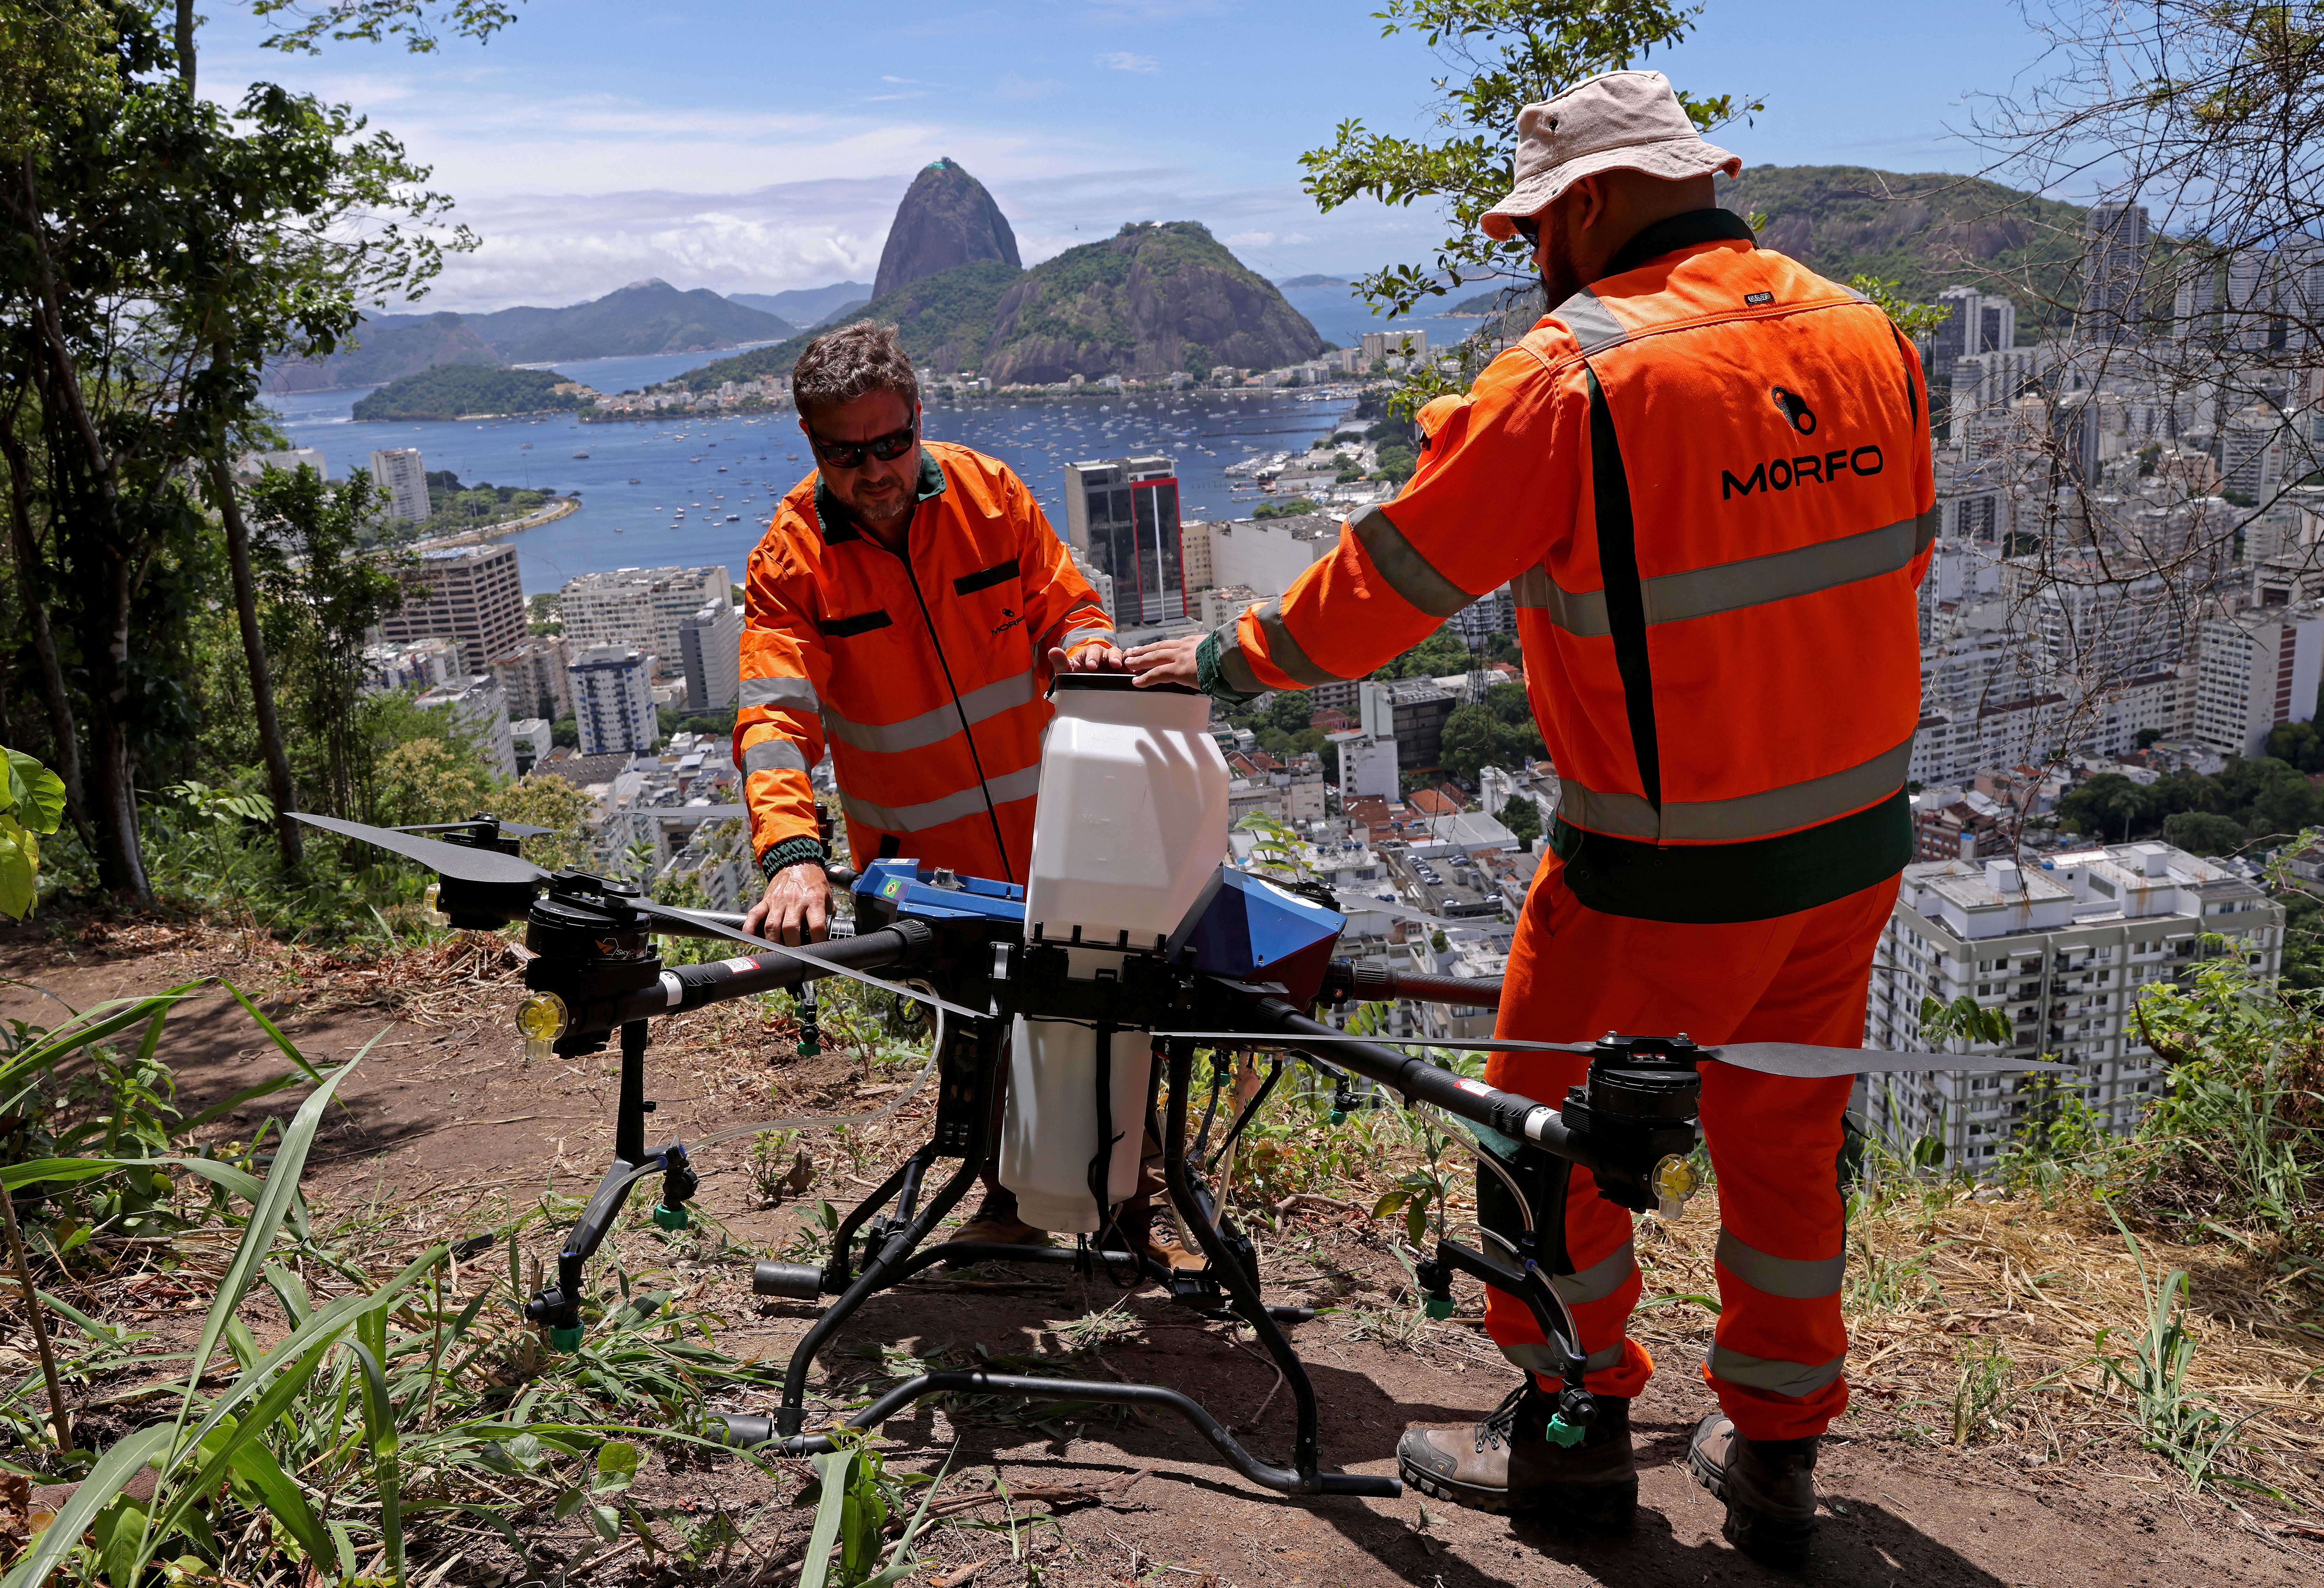 In Brazil, drones take flight in Rio in high-tech reforestation push | Reuters